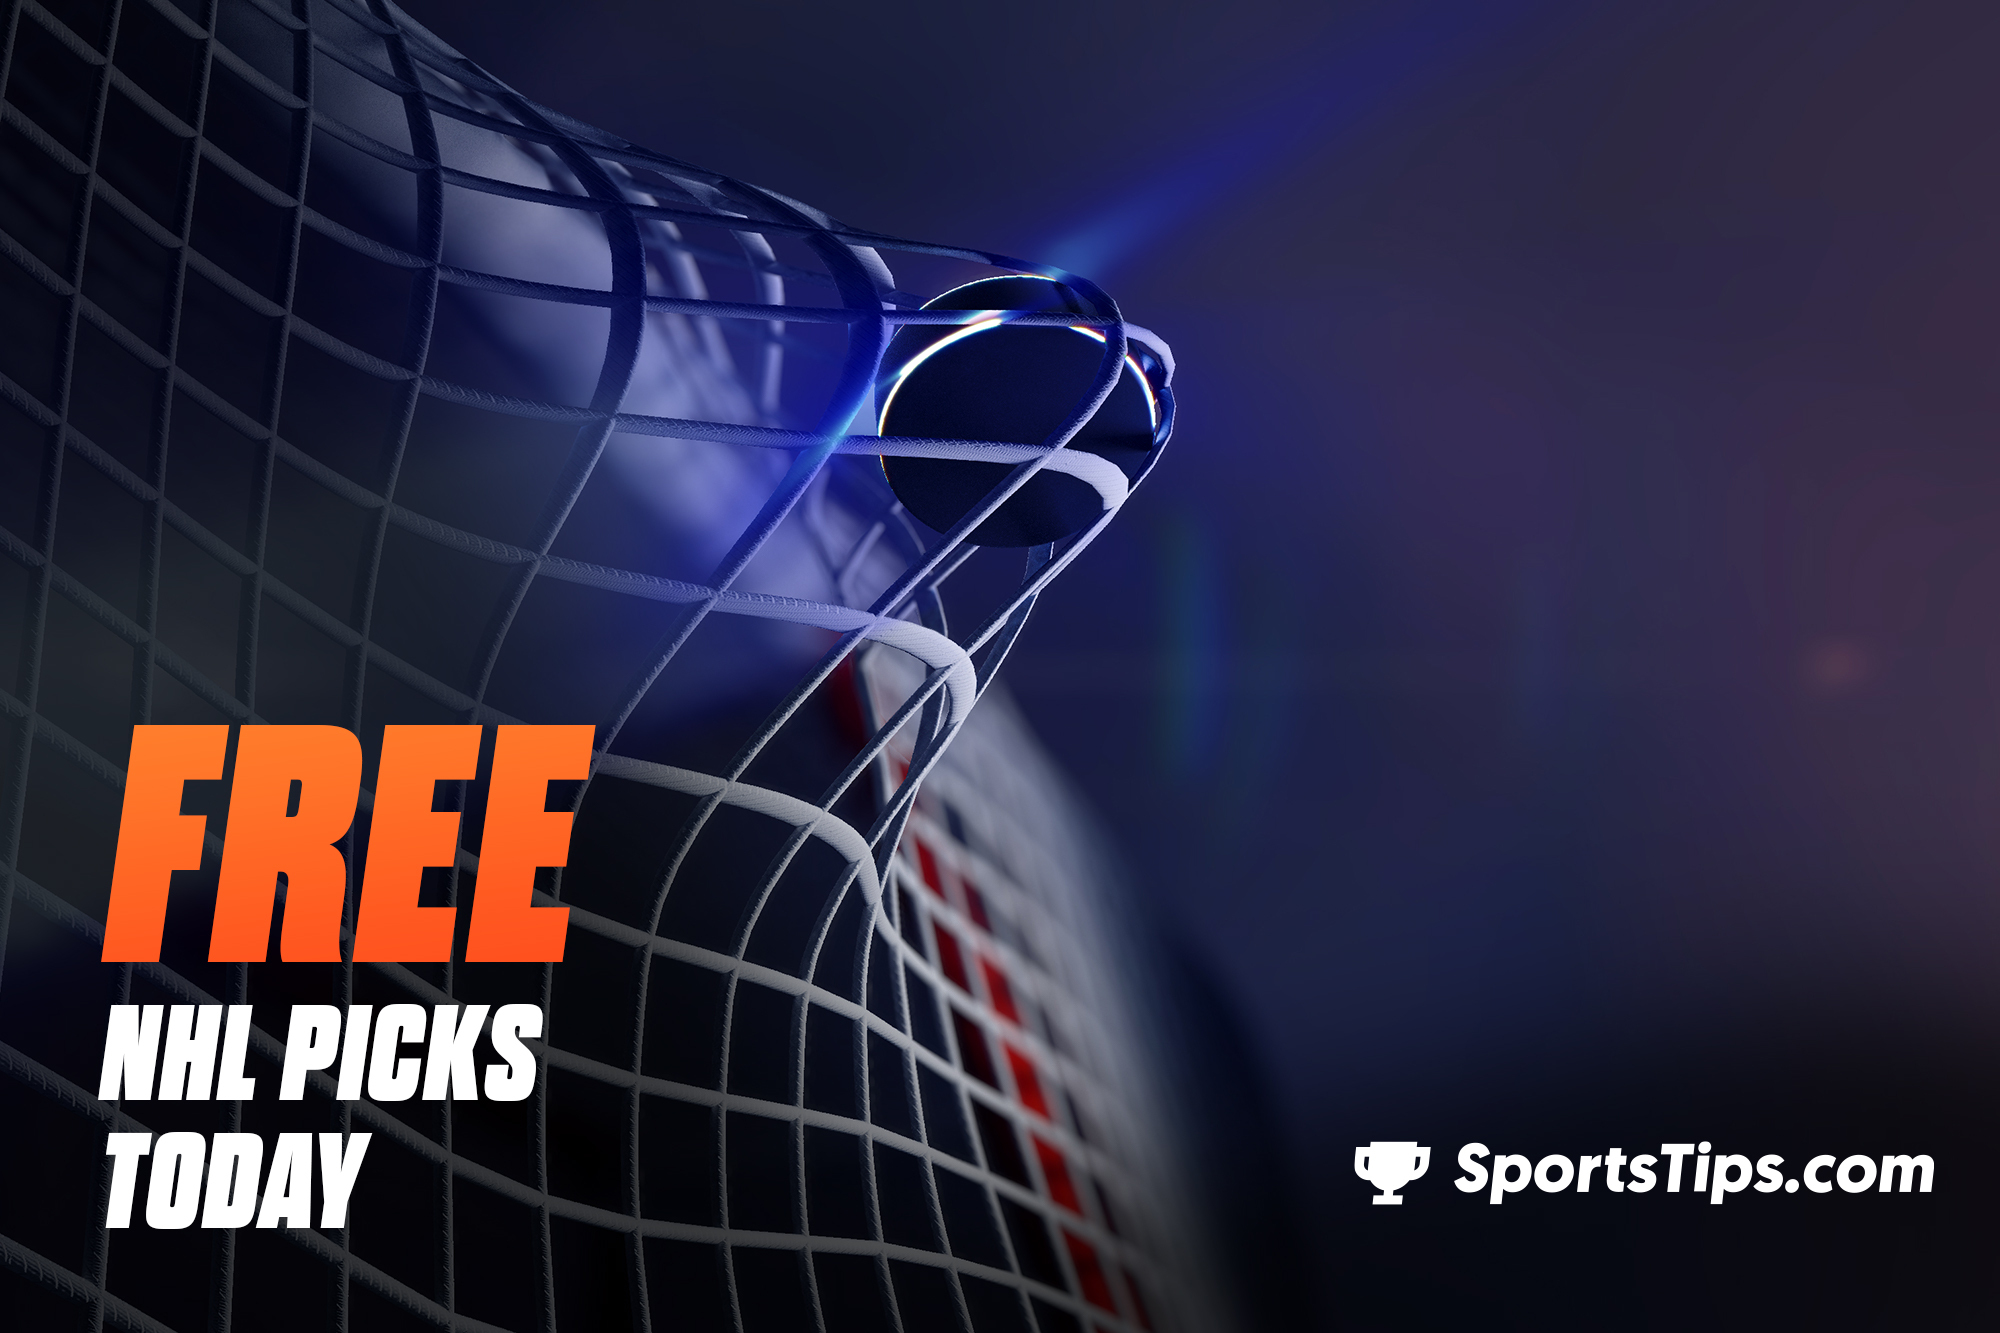 Free NHL Picks Today for Tuesday, December 7th, 2021